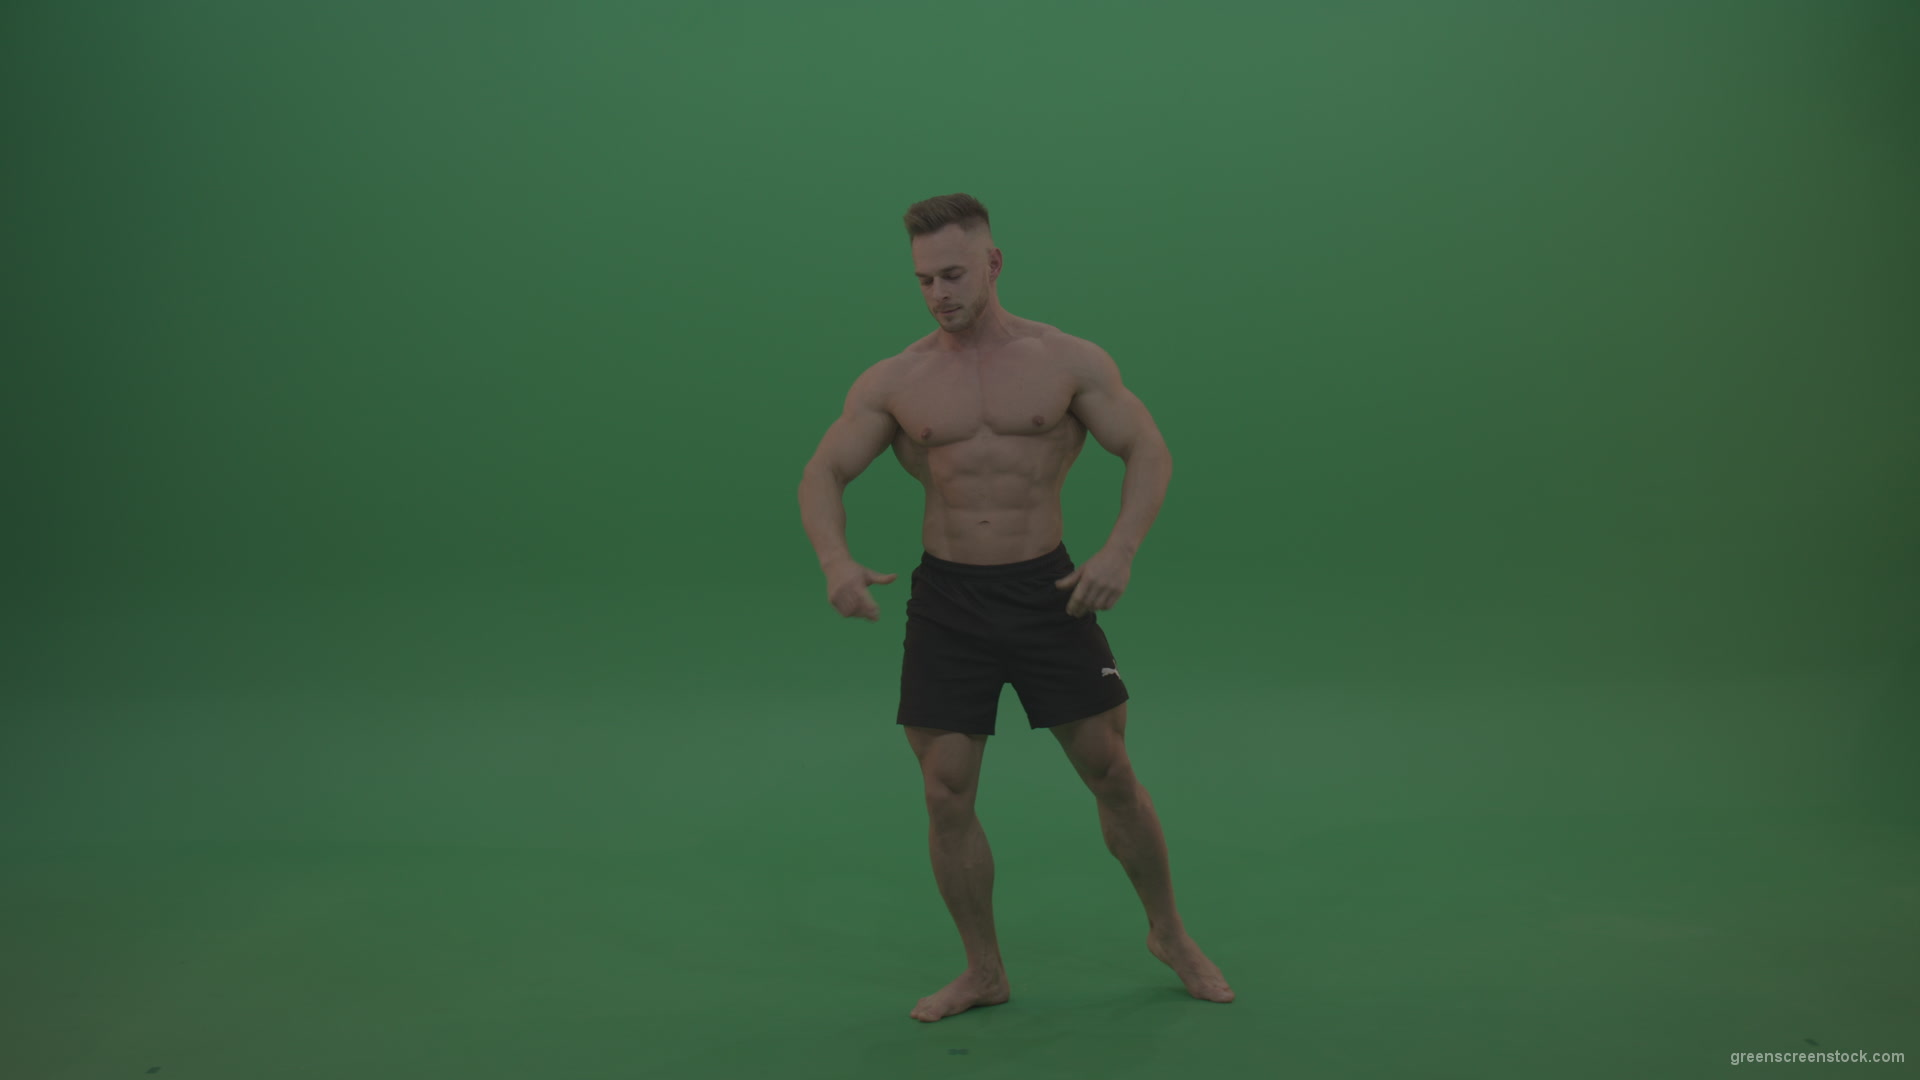 Young_Athletic_Bodybuilder_Demonstrating_Front_Double_Biceps_And_Lateral_Spread_Positions_On_Green_Screen_Wall_Background_009 Green Screen Stock